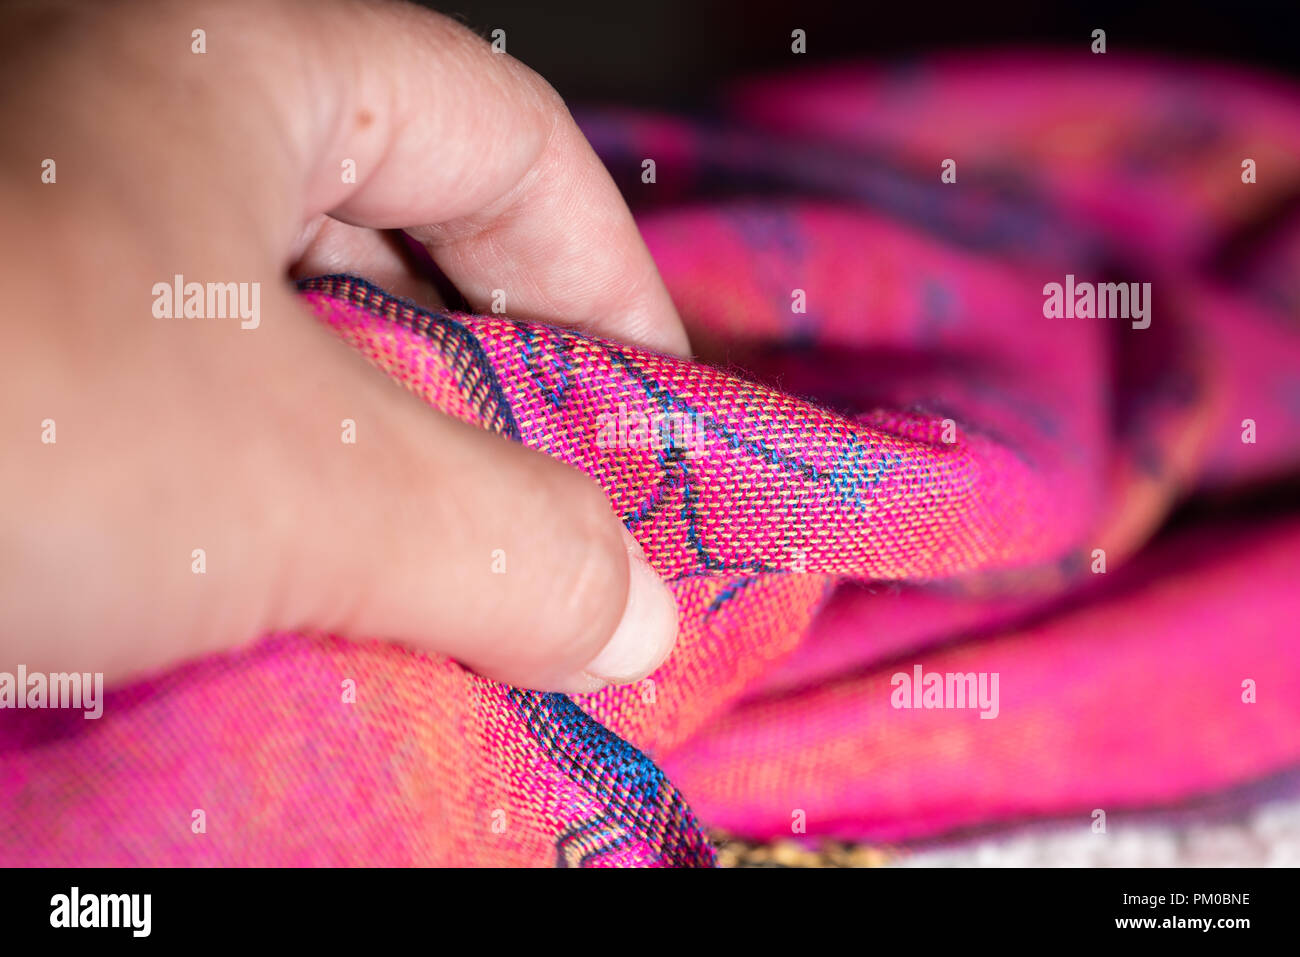 Hand soflty touching a pink cashmere fabric Stock Photo